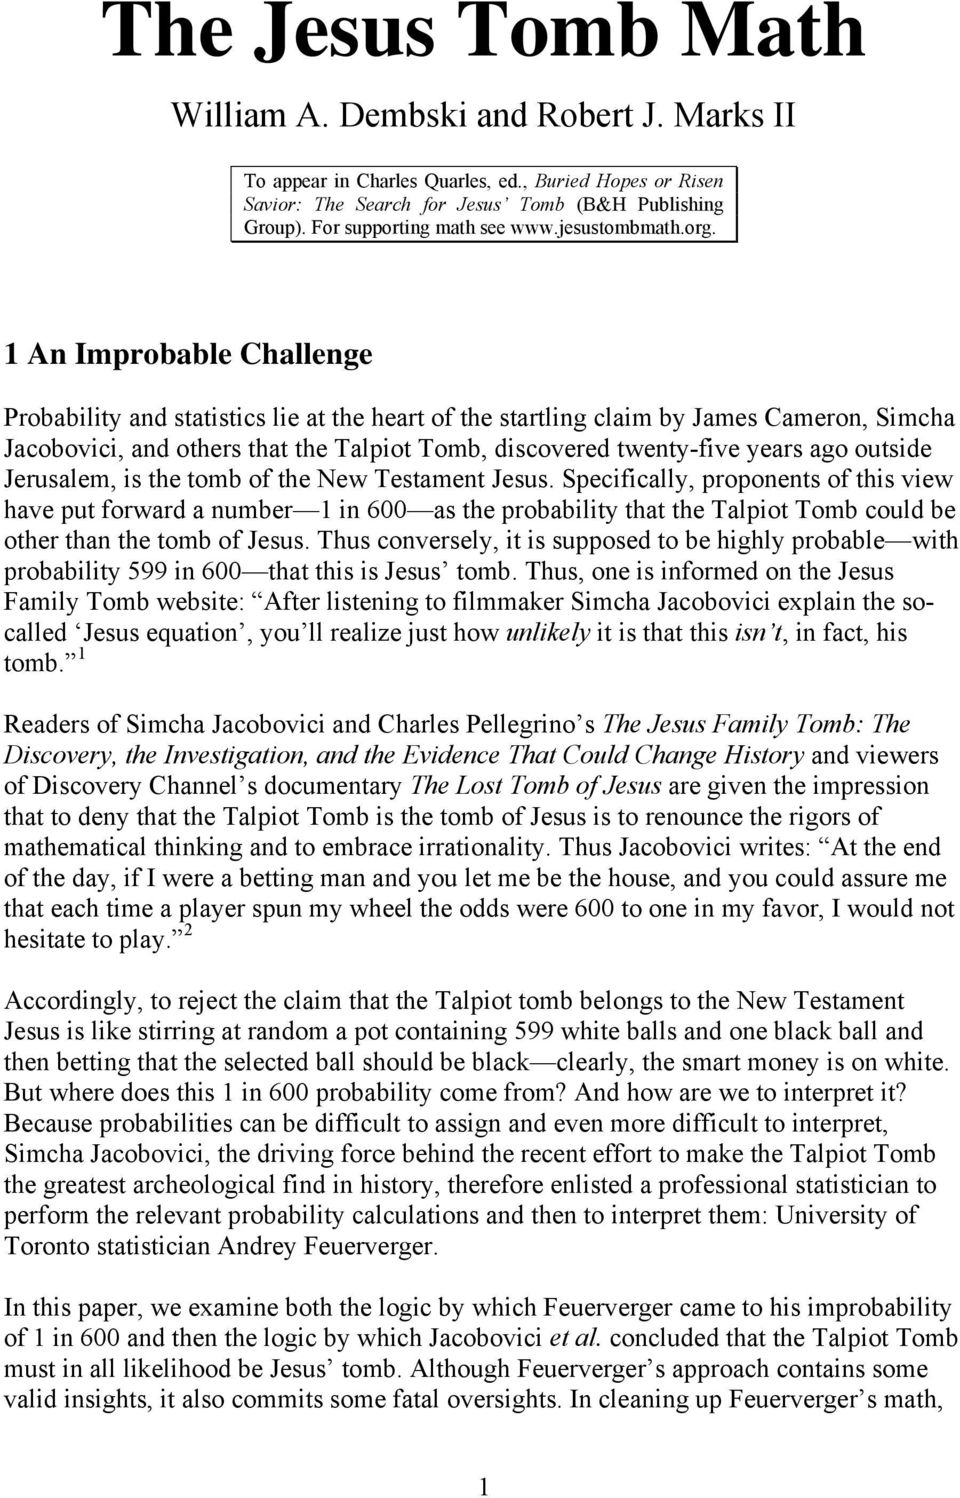 1 An Improbable Challenge Probability and statistics lie at the heart of the startling claim by James Cameron, Simcha Jacobovici, and others that the Talpiot Tomb, discovered twenty-five years ago